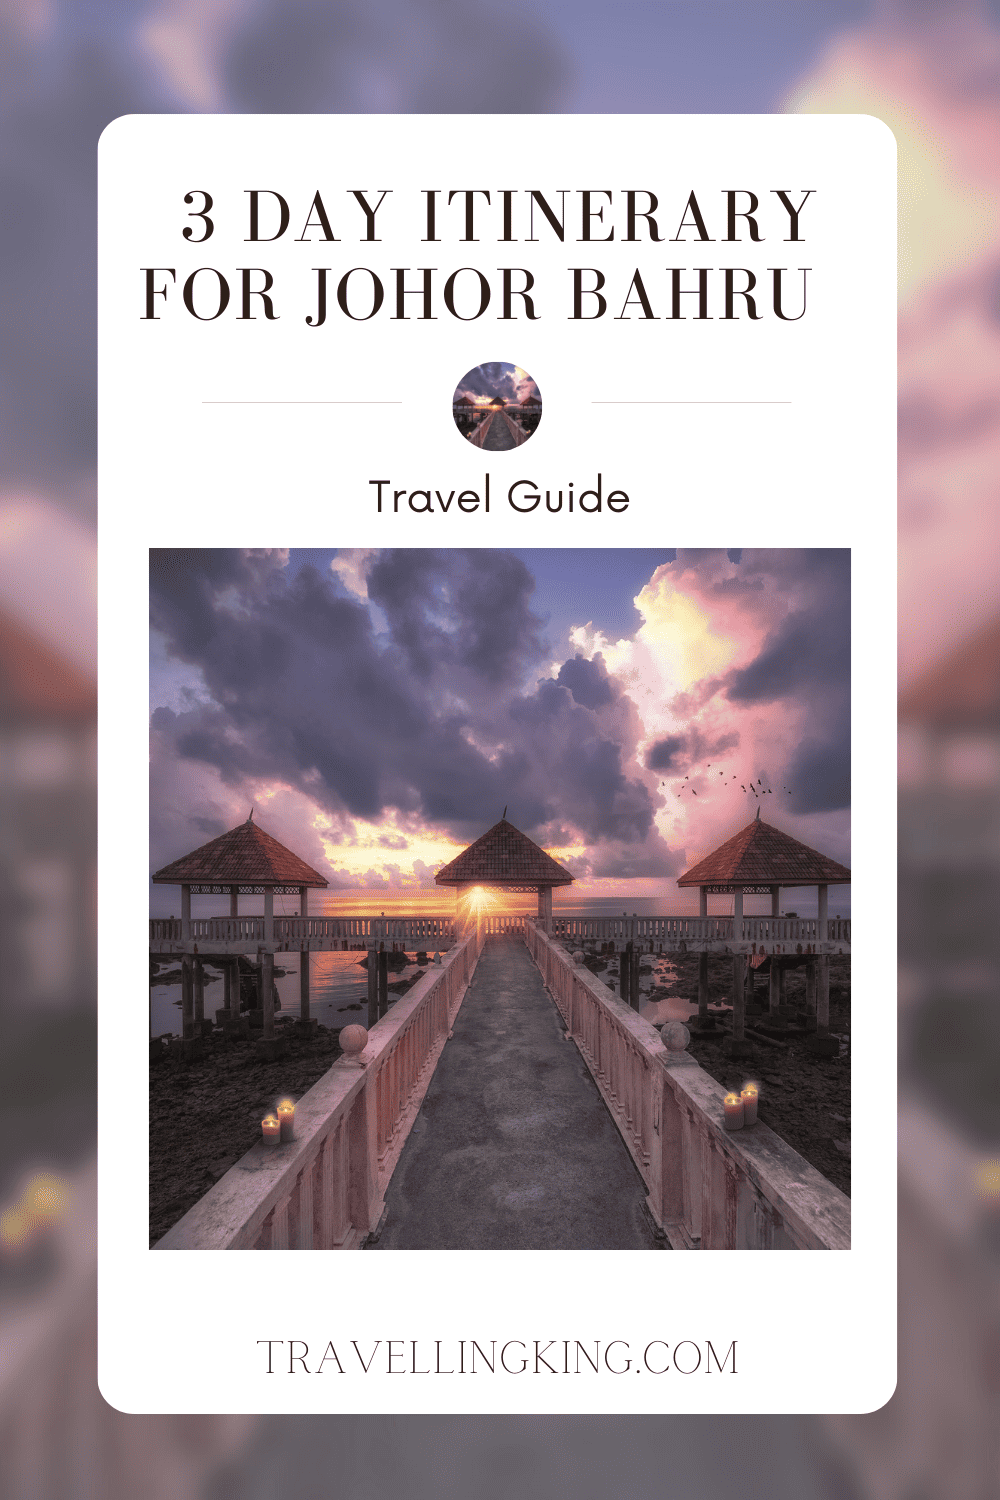 A 3 Day Itinerary for Johor Bahru